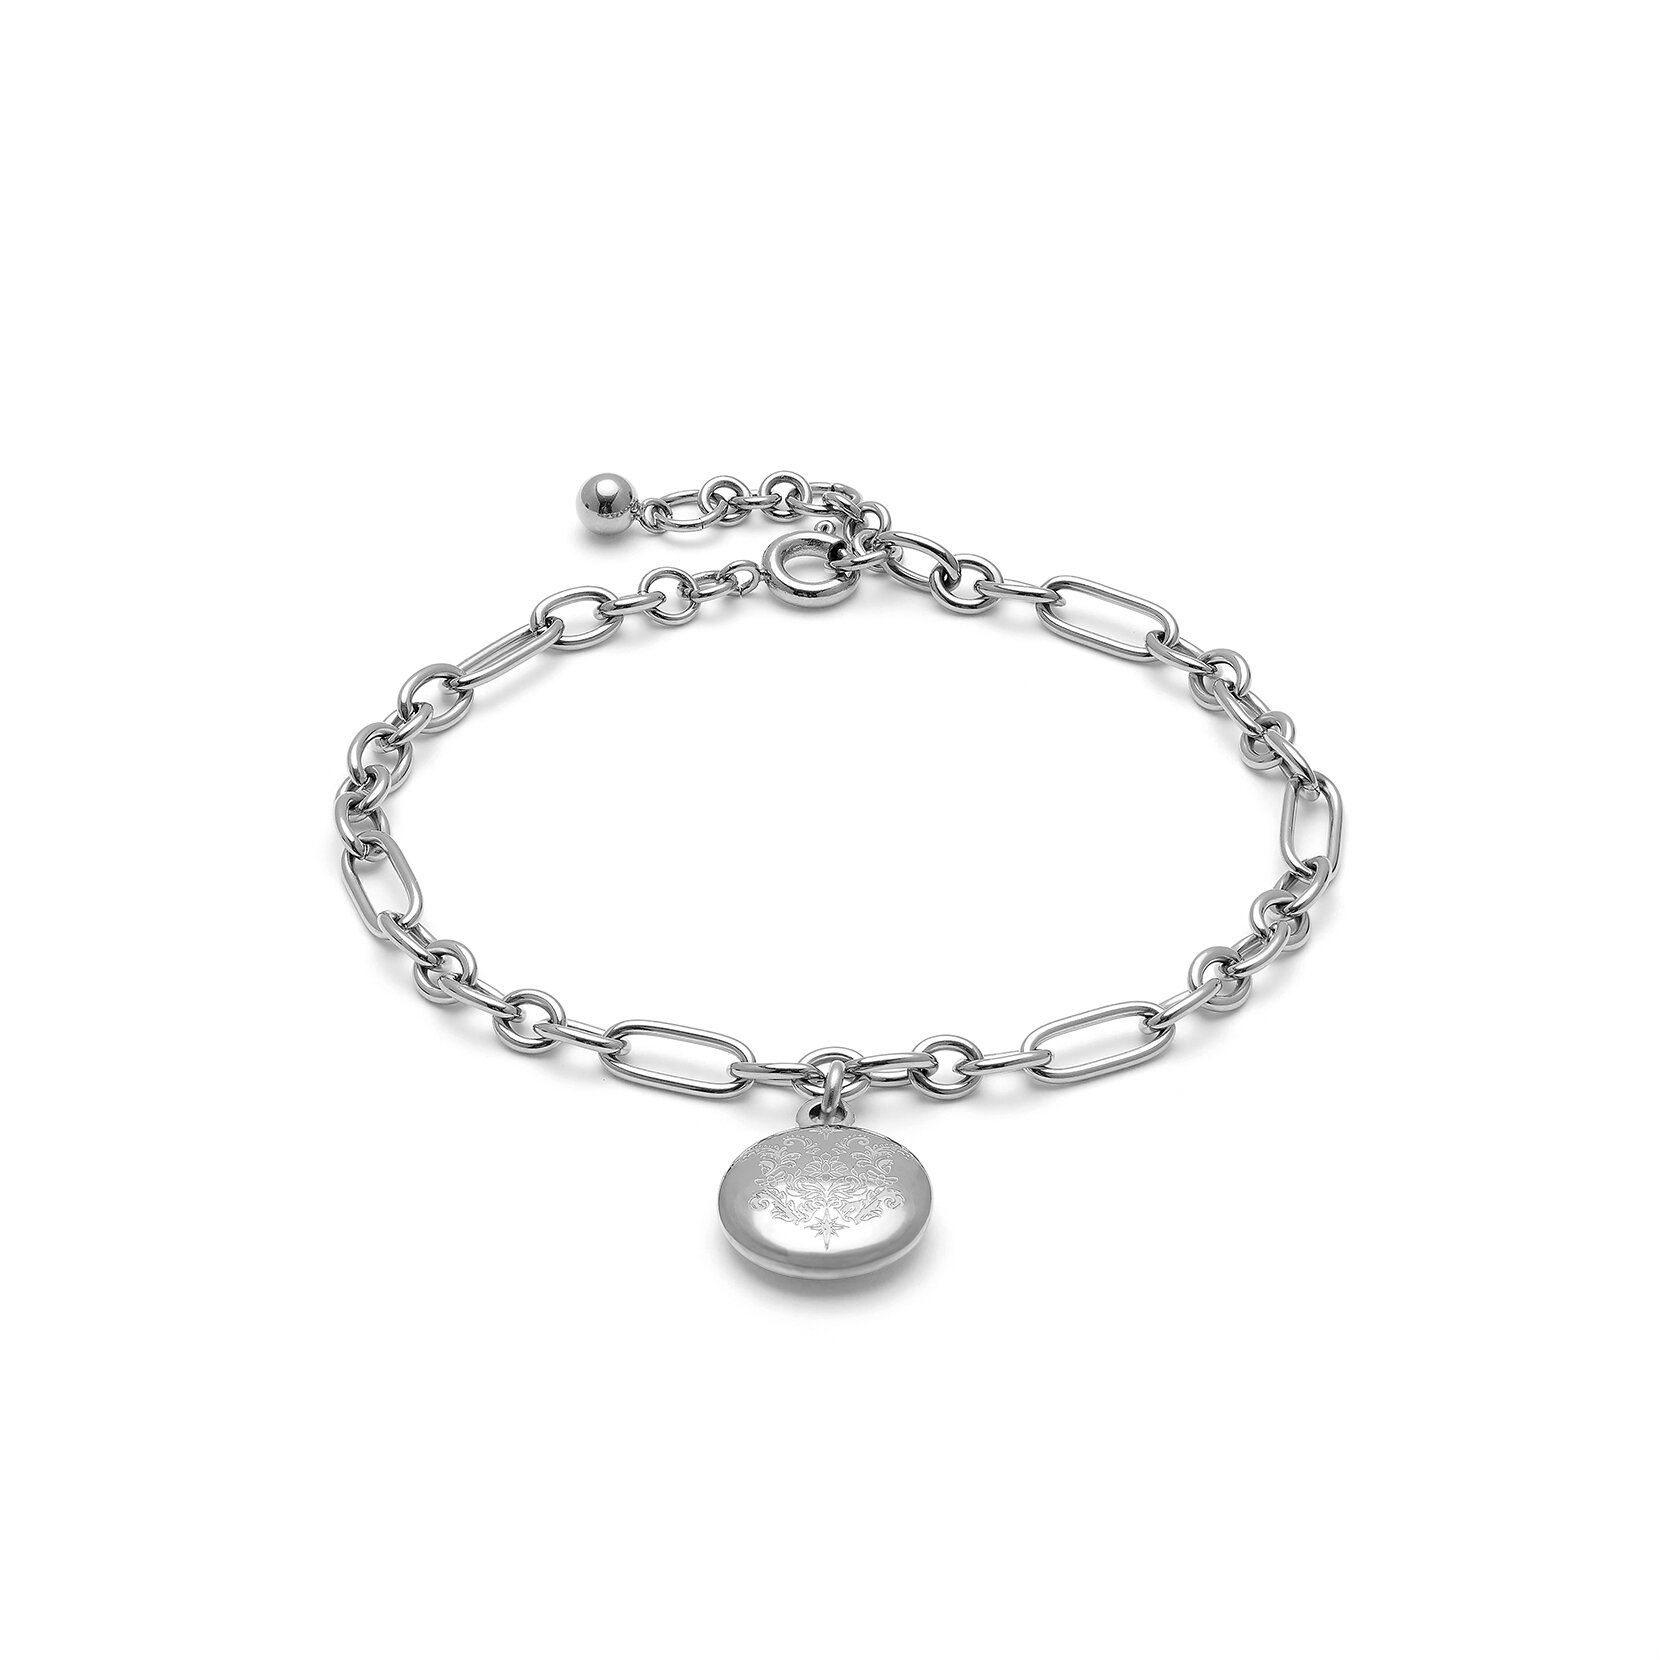 Ever Stacked Silver Tone Multi-Chain Bracelet